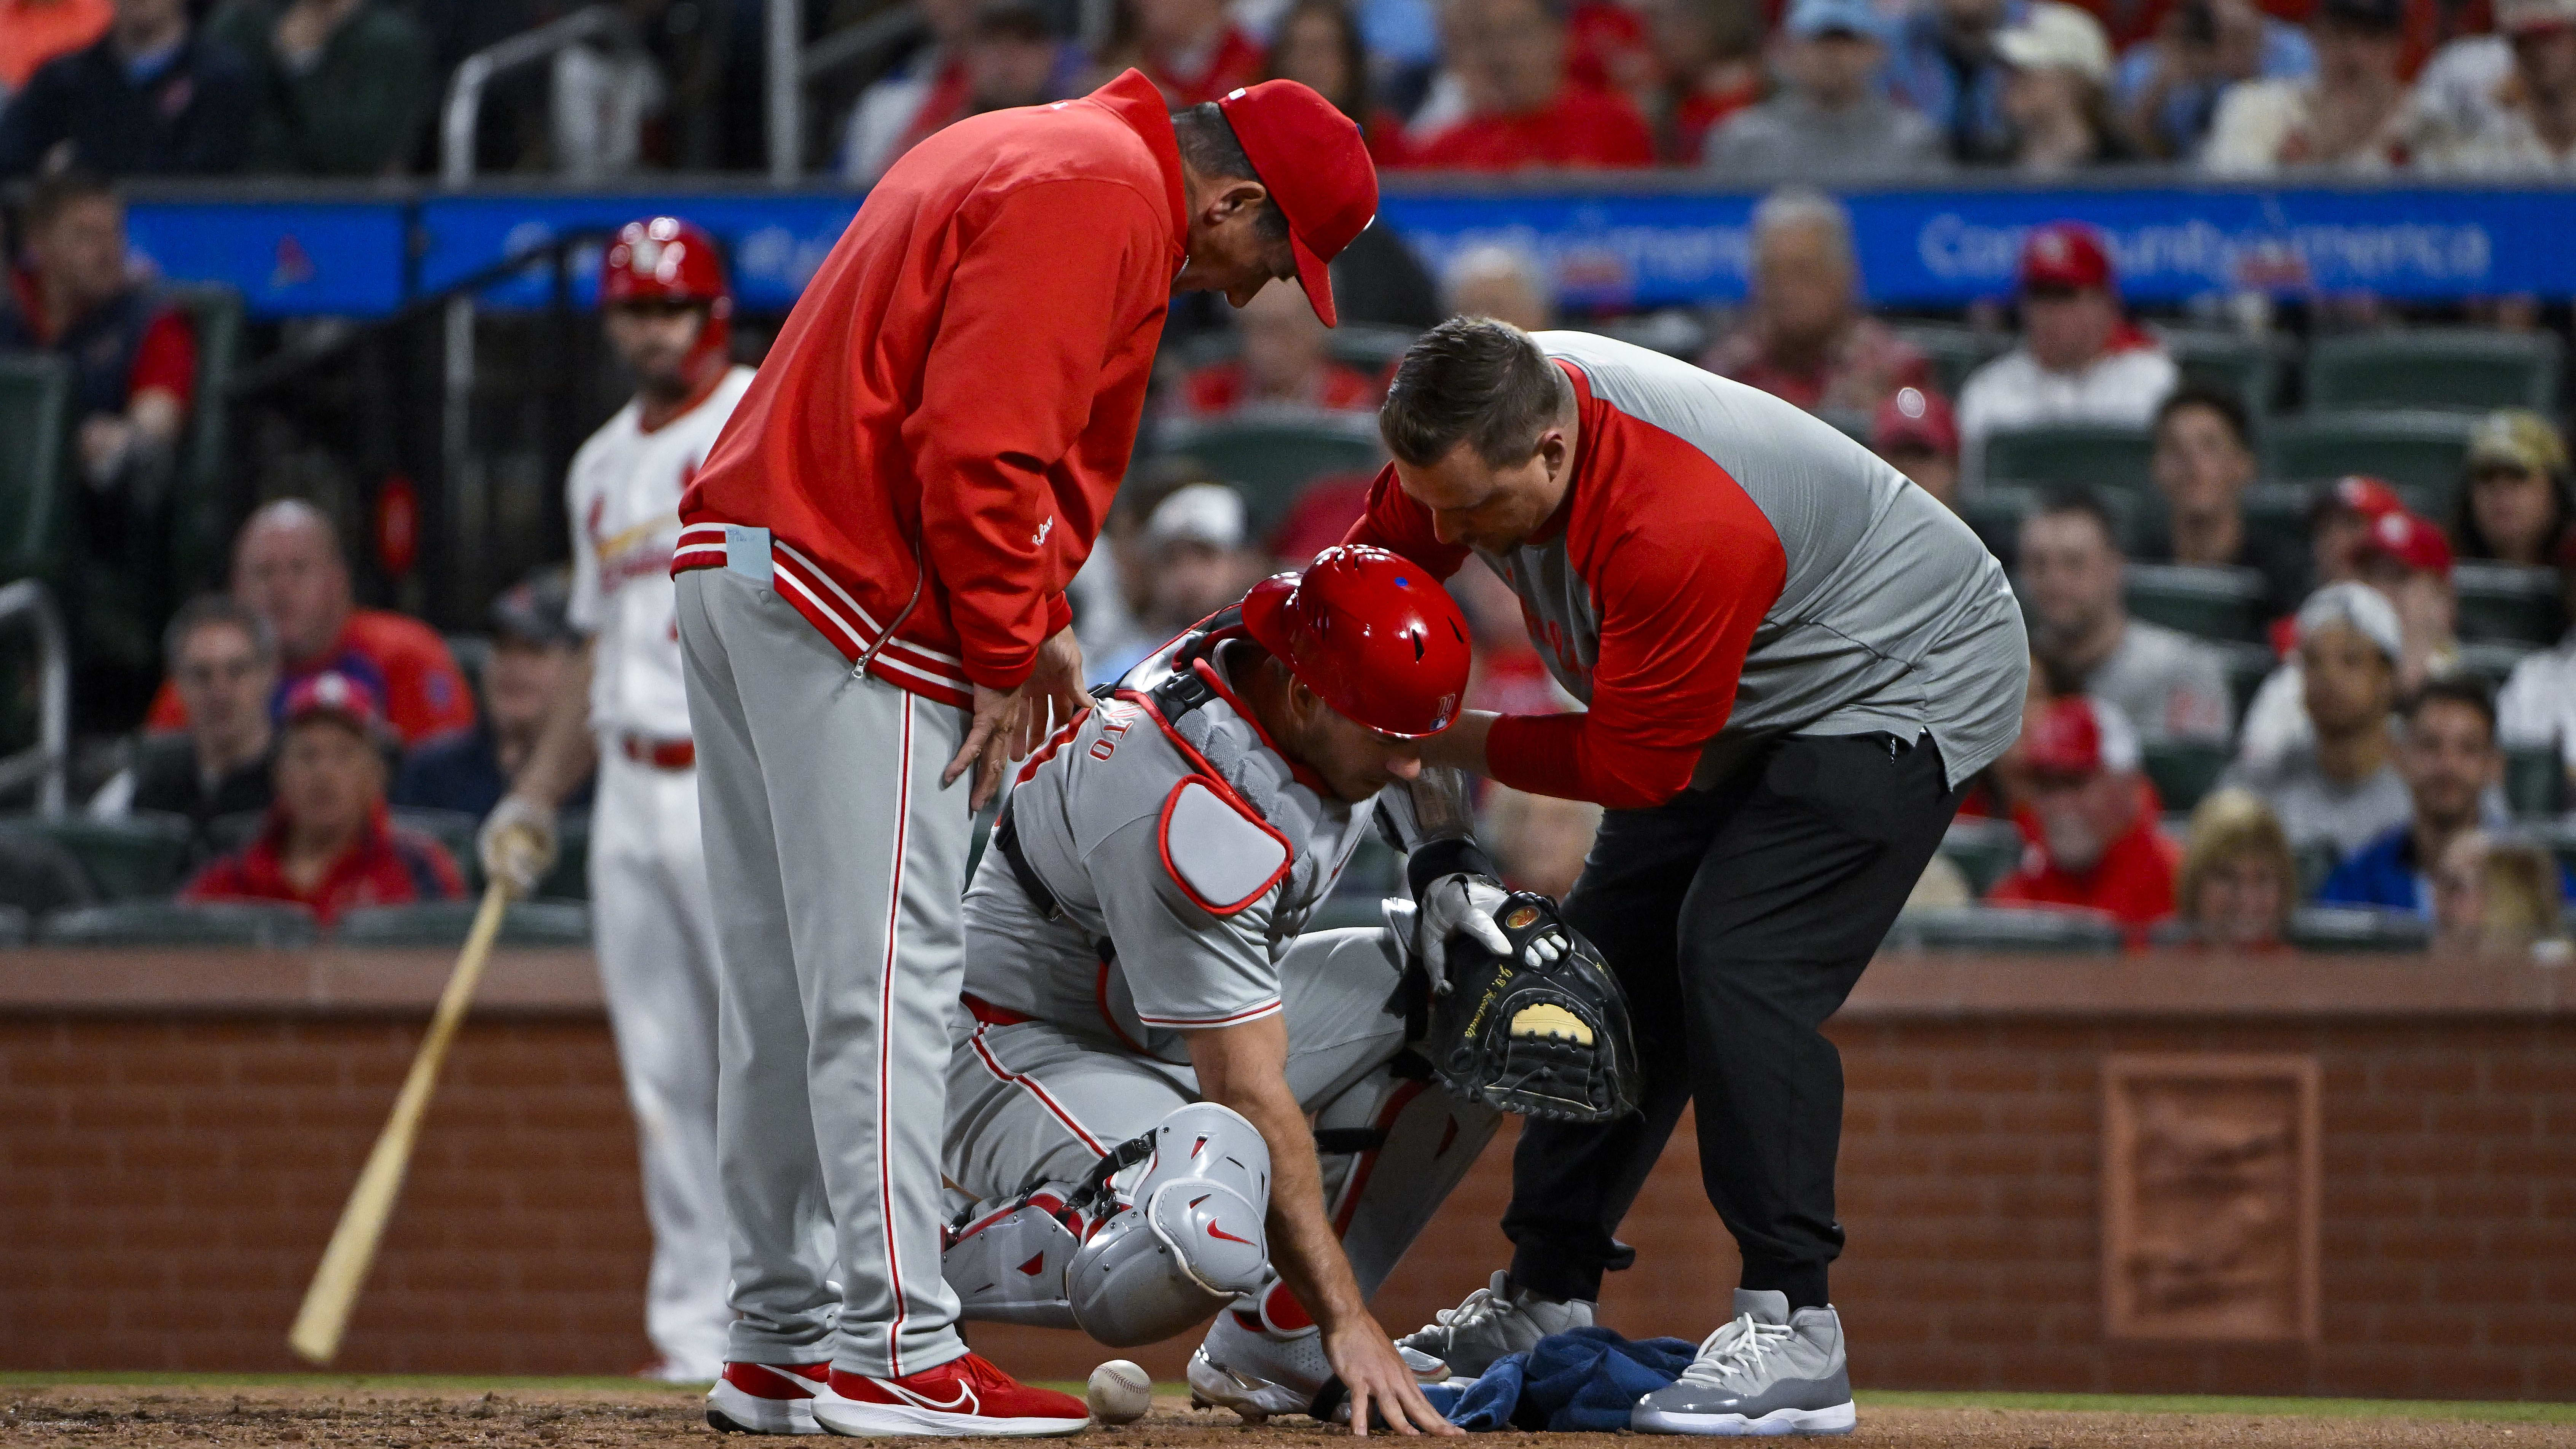 Philadelphia Phillies catcher J.T. Realmuto was diagnosed with a throat contusion after leaving Tuesday's game